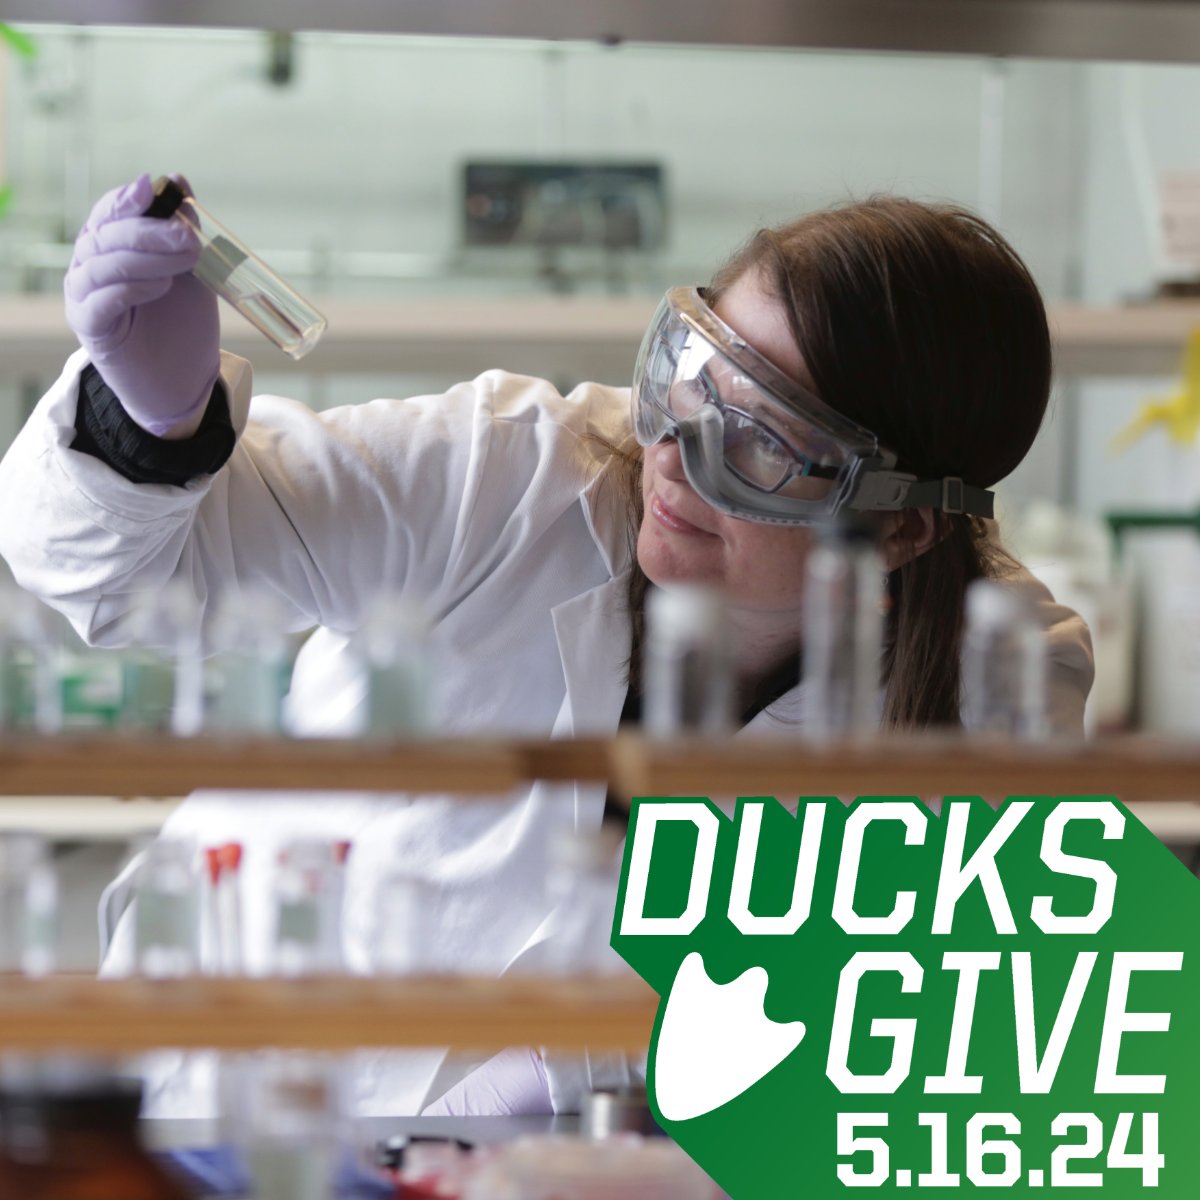 Ducks Give is right around the corner! Help Ducks take flight and support the College of Arts and Sciences! 💚 💛 Your gift will help break financial barriers, foster equal opportunity, and empower career development. Learn more and give your support: bit.ly/3UHjj2D